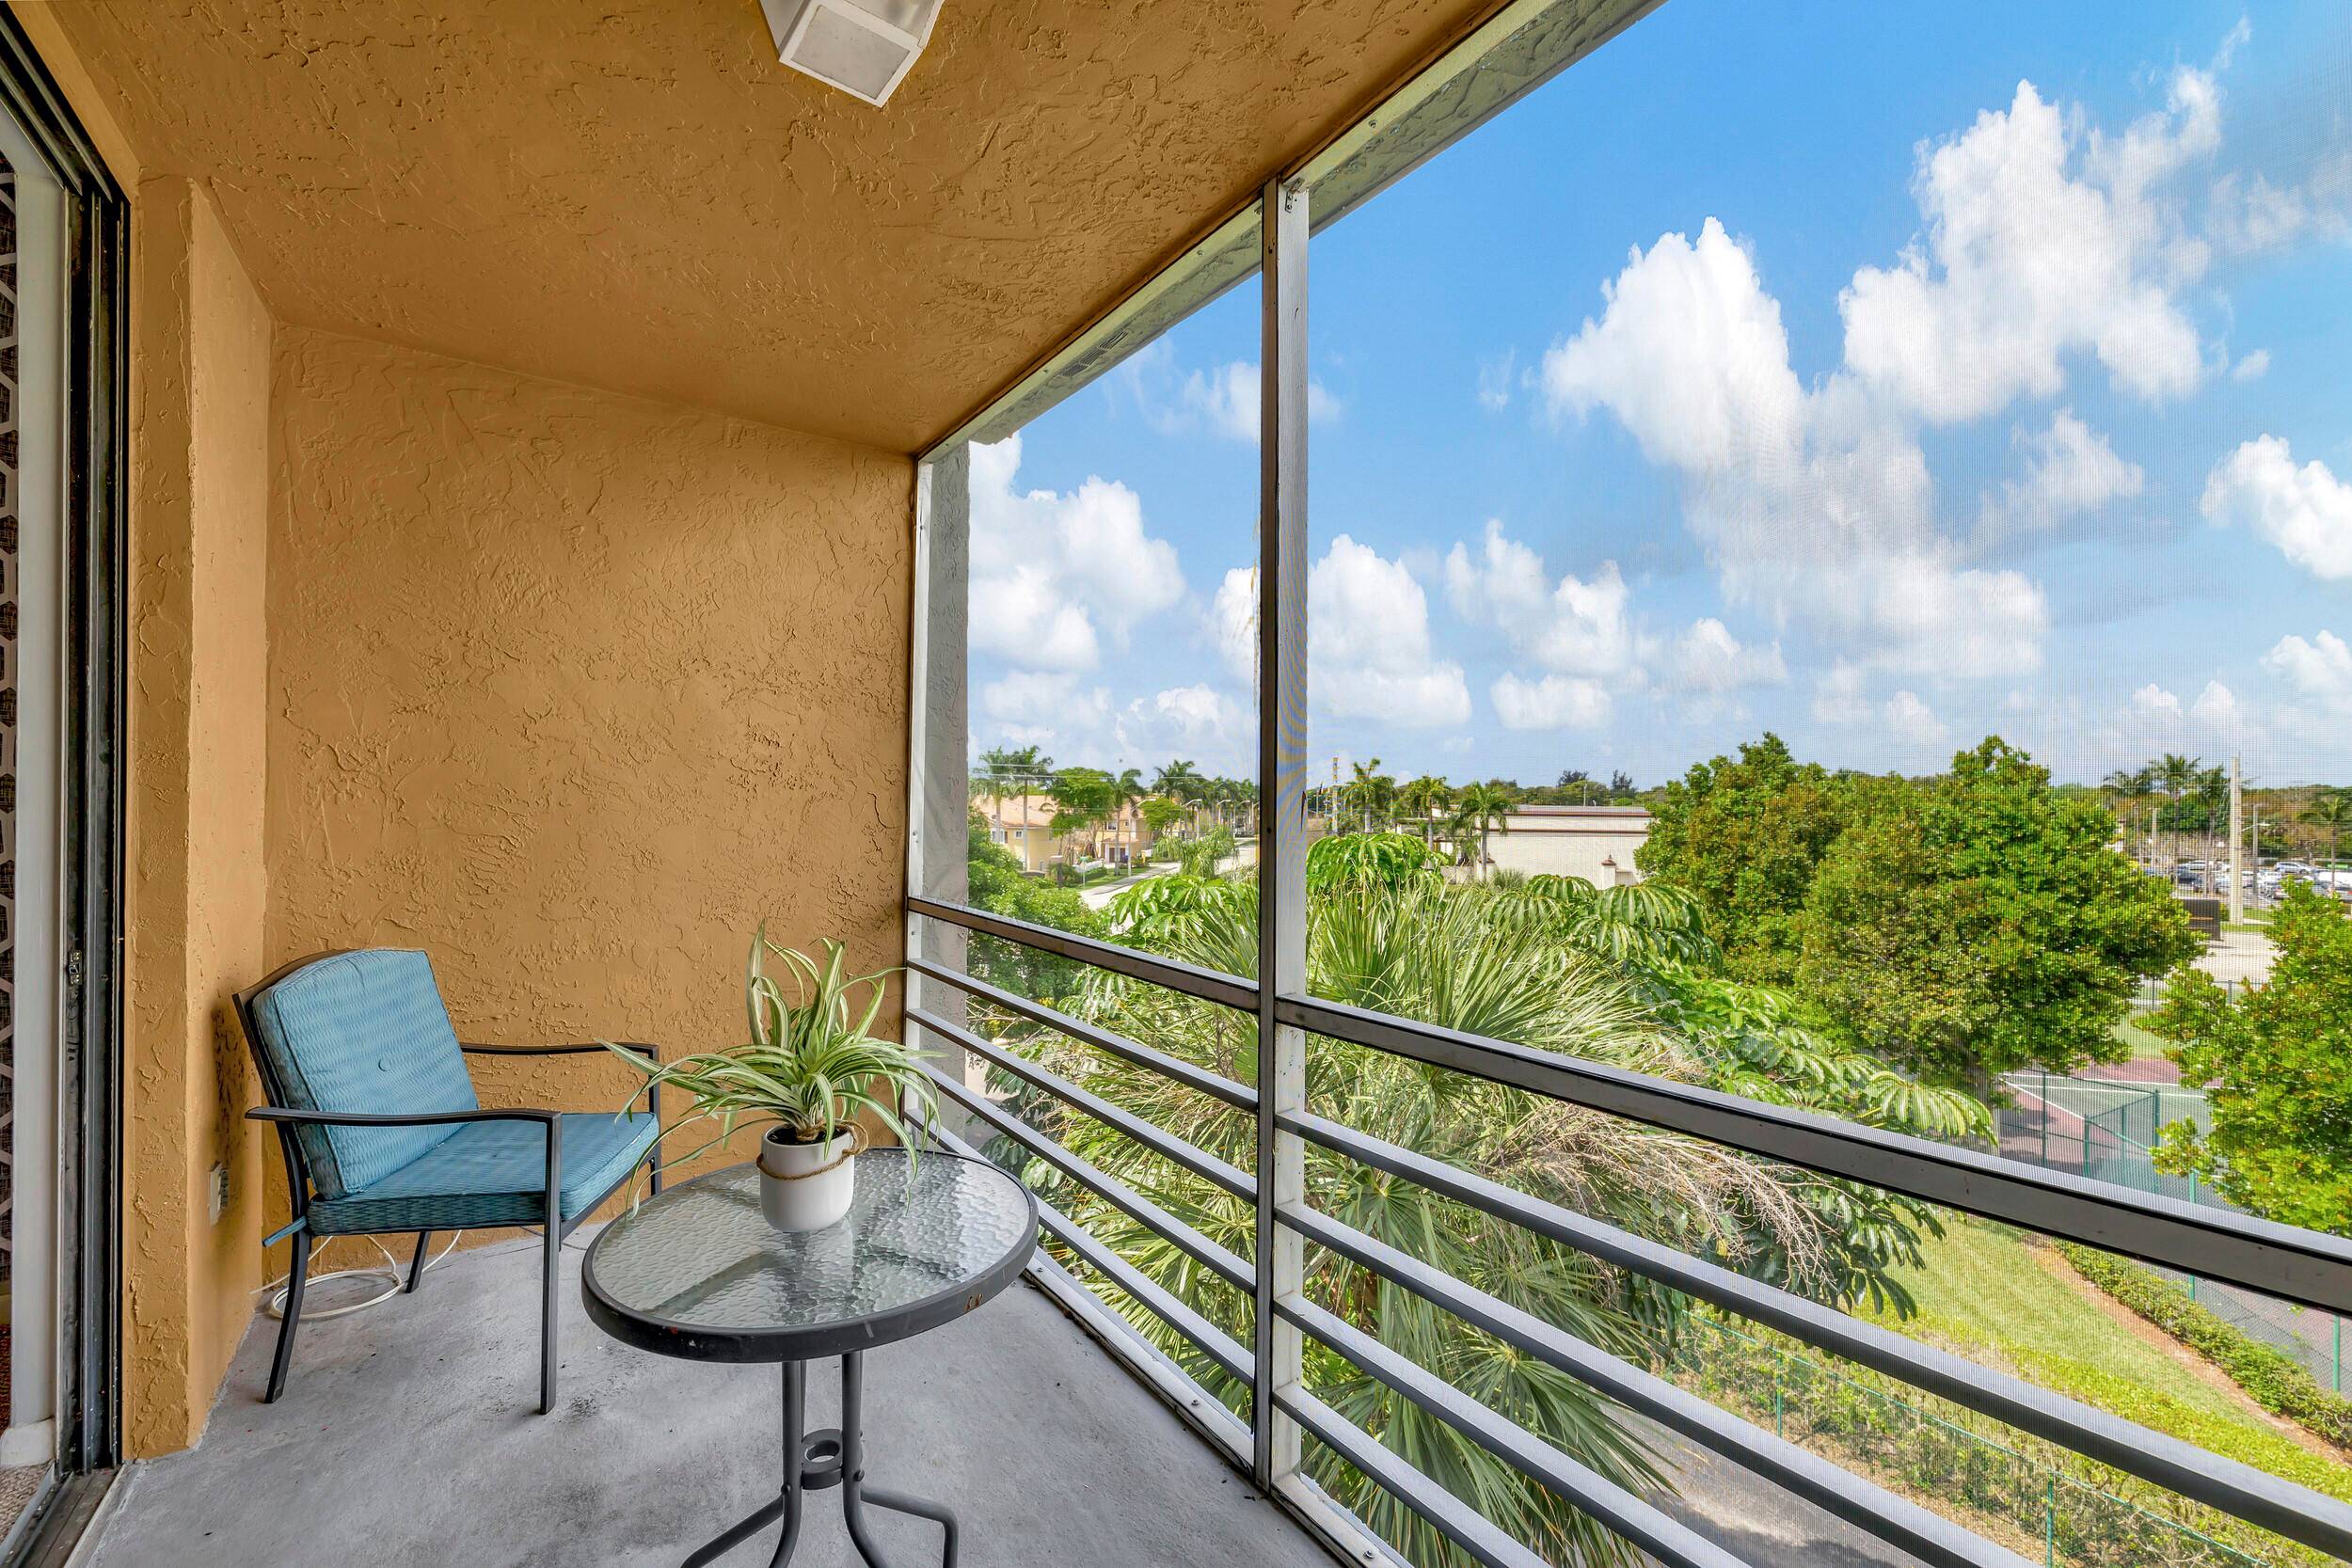 Enjoy Stunning Views and a Vibrant Lifestyle in this Move In Ready 4th floor, 2 bedroom, 2 bath condo with Fantastic Community Amenities such as large swimming pool, fitness center, ...